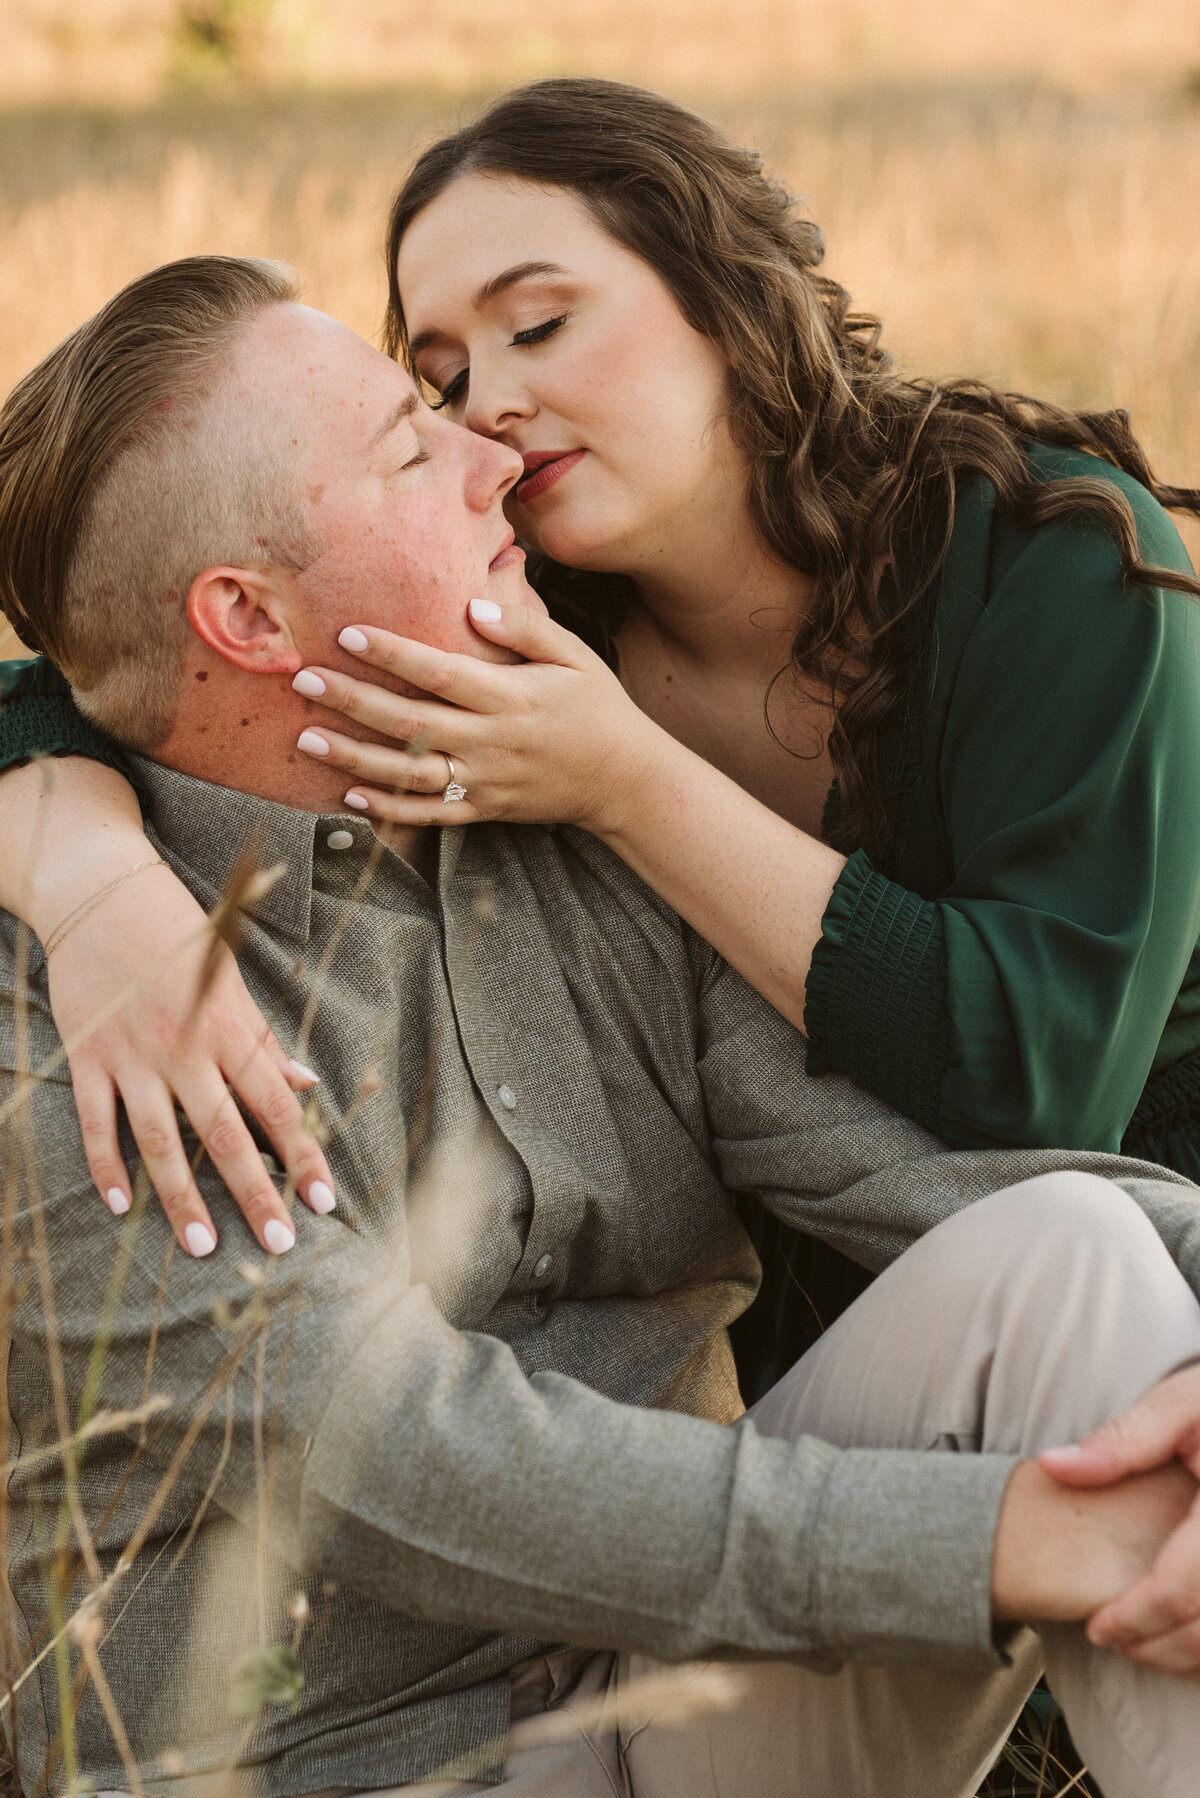 Emily-and-Jordan-engagement-session-at-arbor-hills-plano-by-bruna-kitchen-photography-61